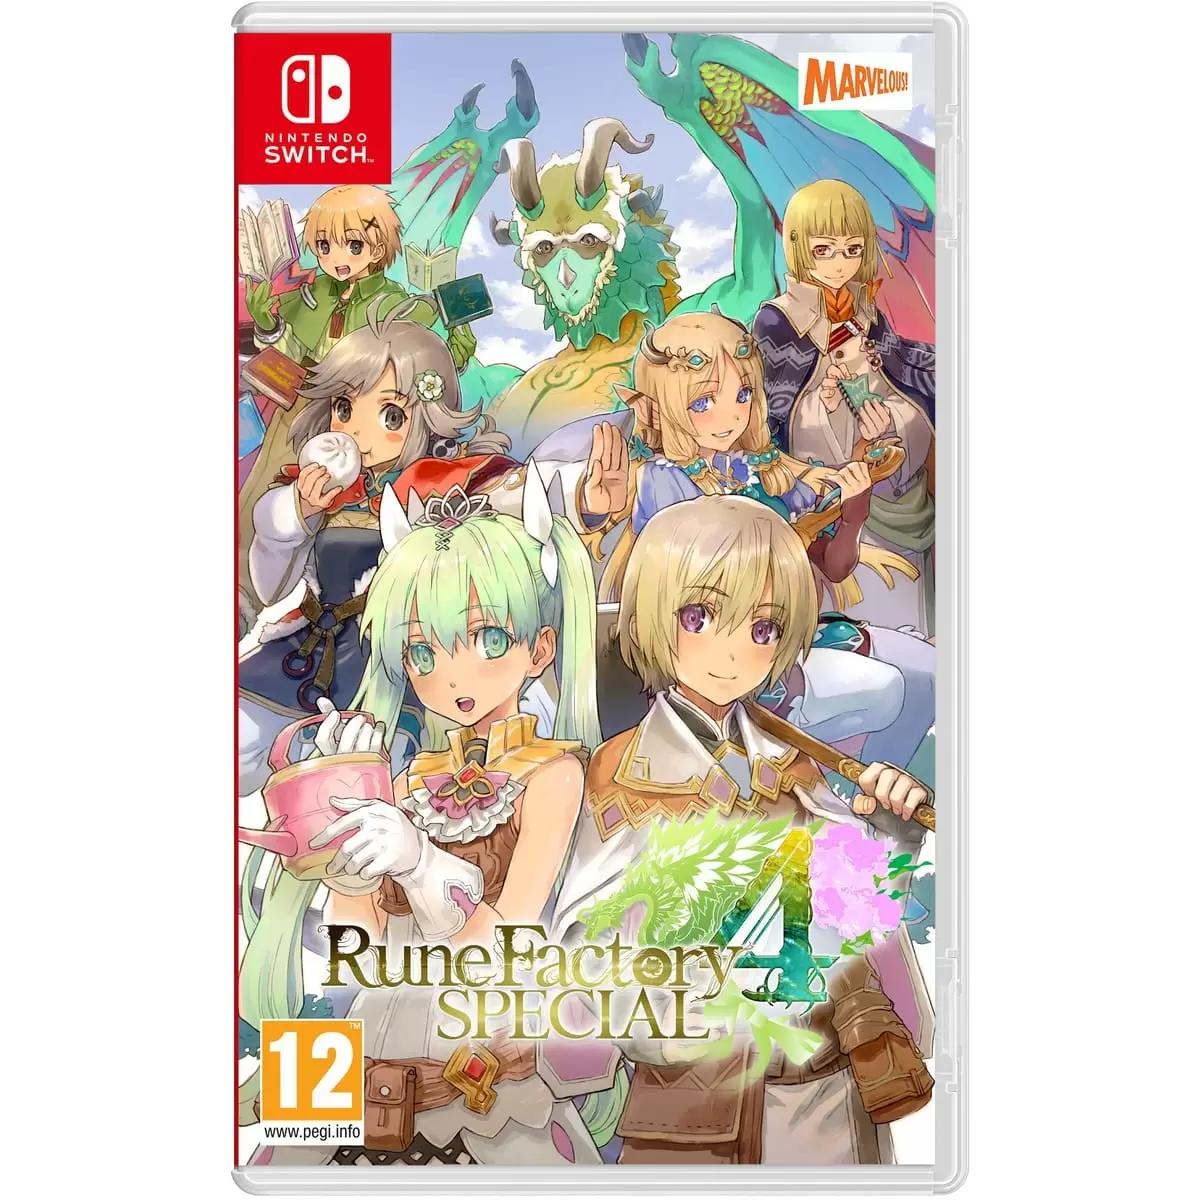 Nintendo Switch Games - Rune Factory 4 Special